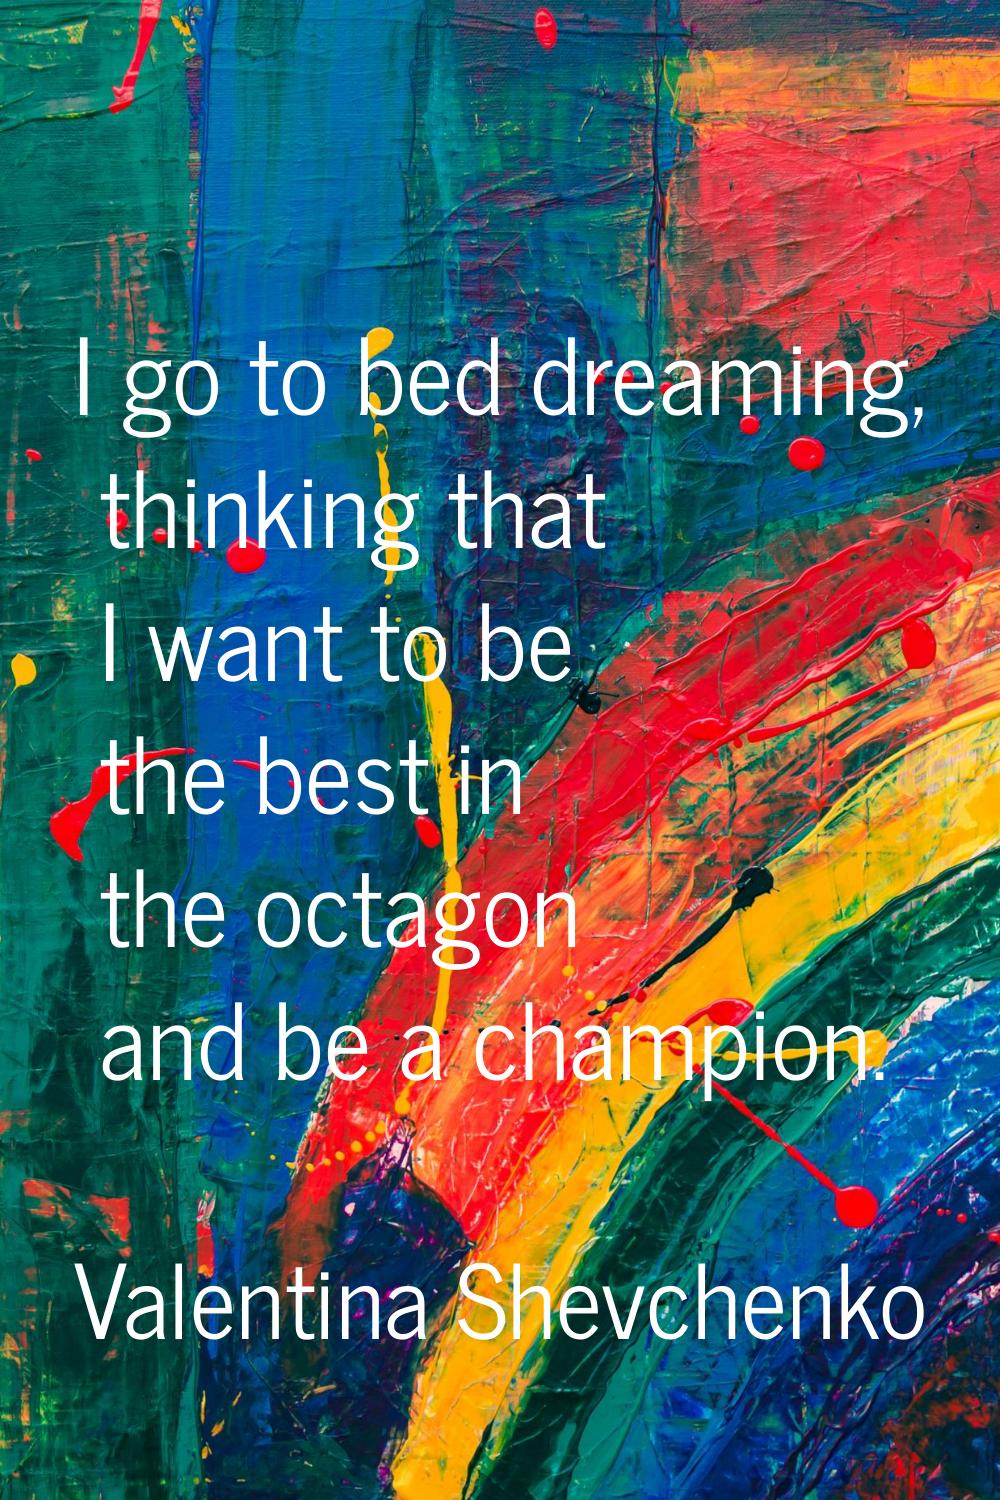 I go to bed dreaming, thinking that I want to be the best in the octagon and be a champion.